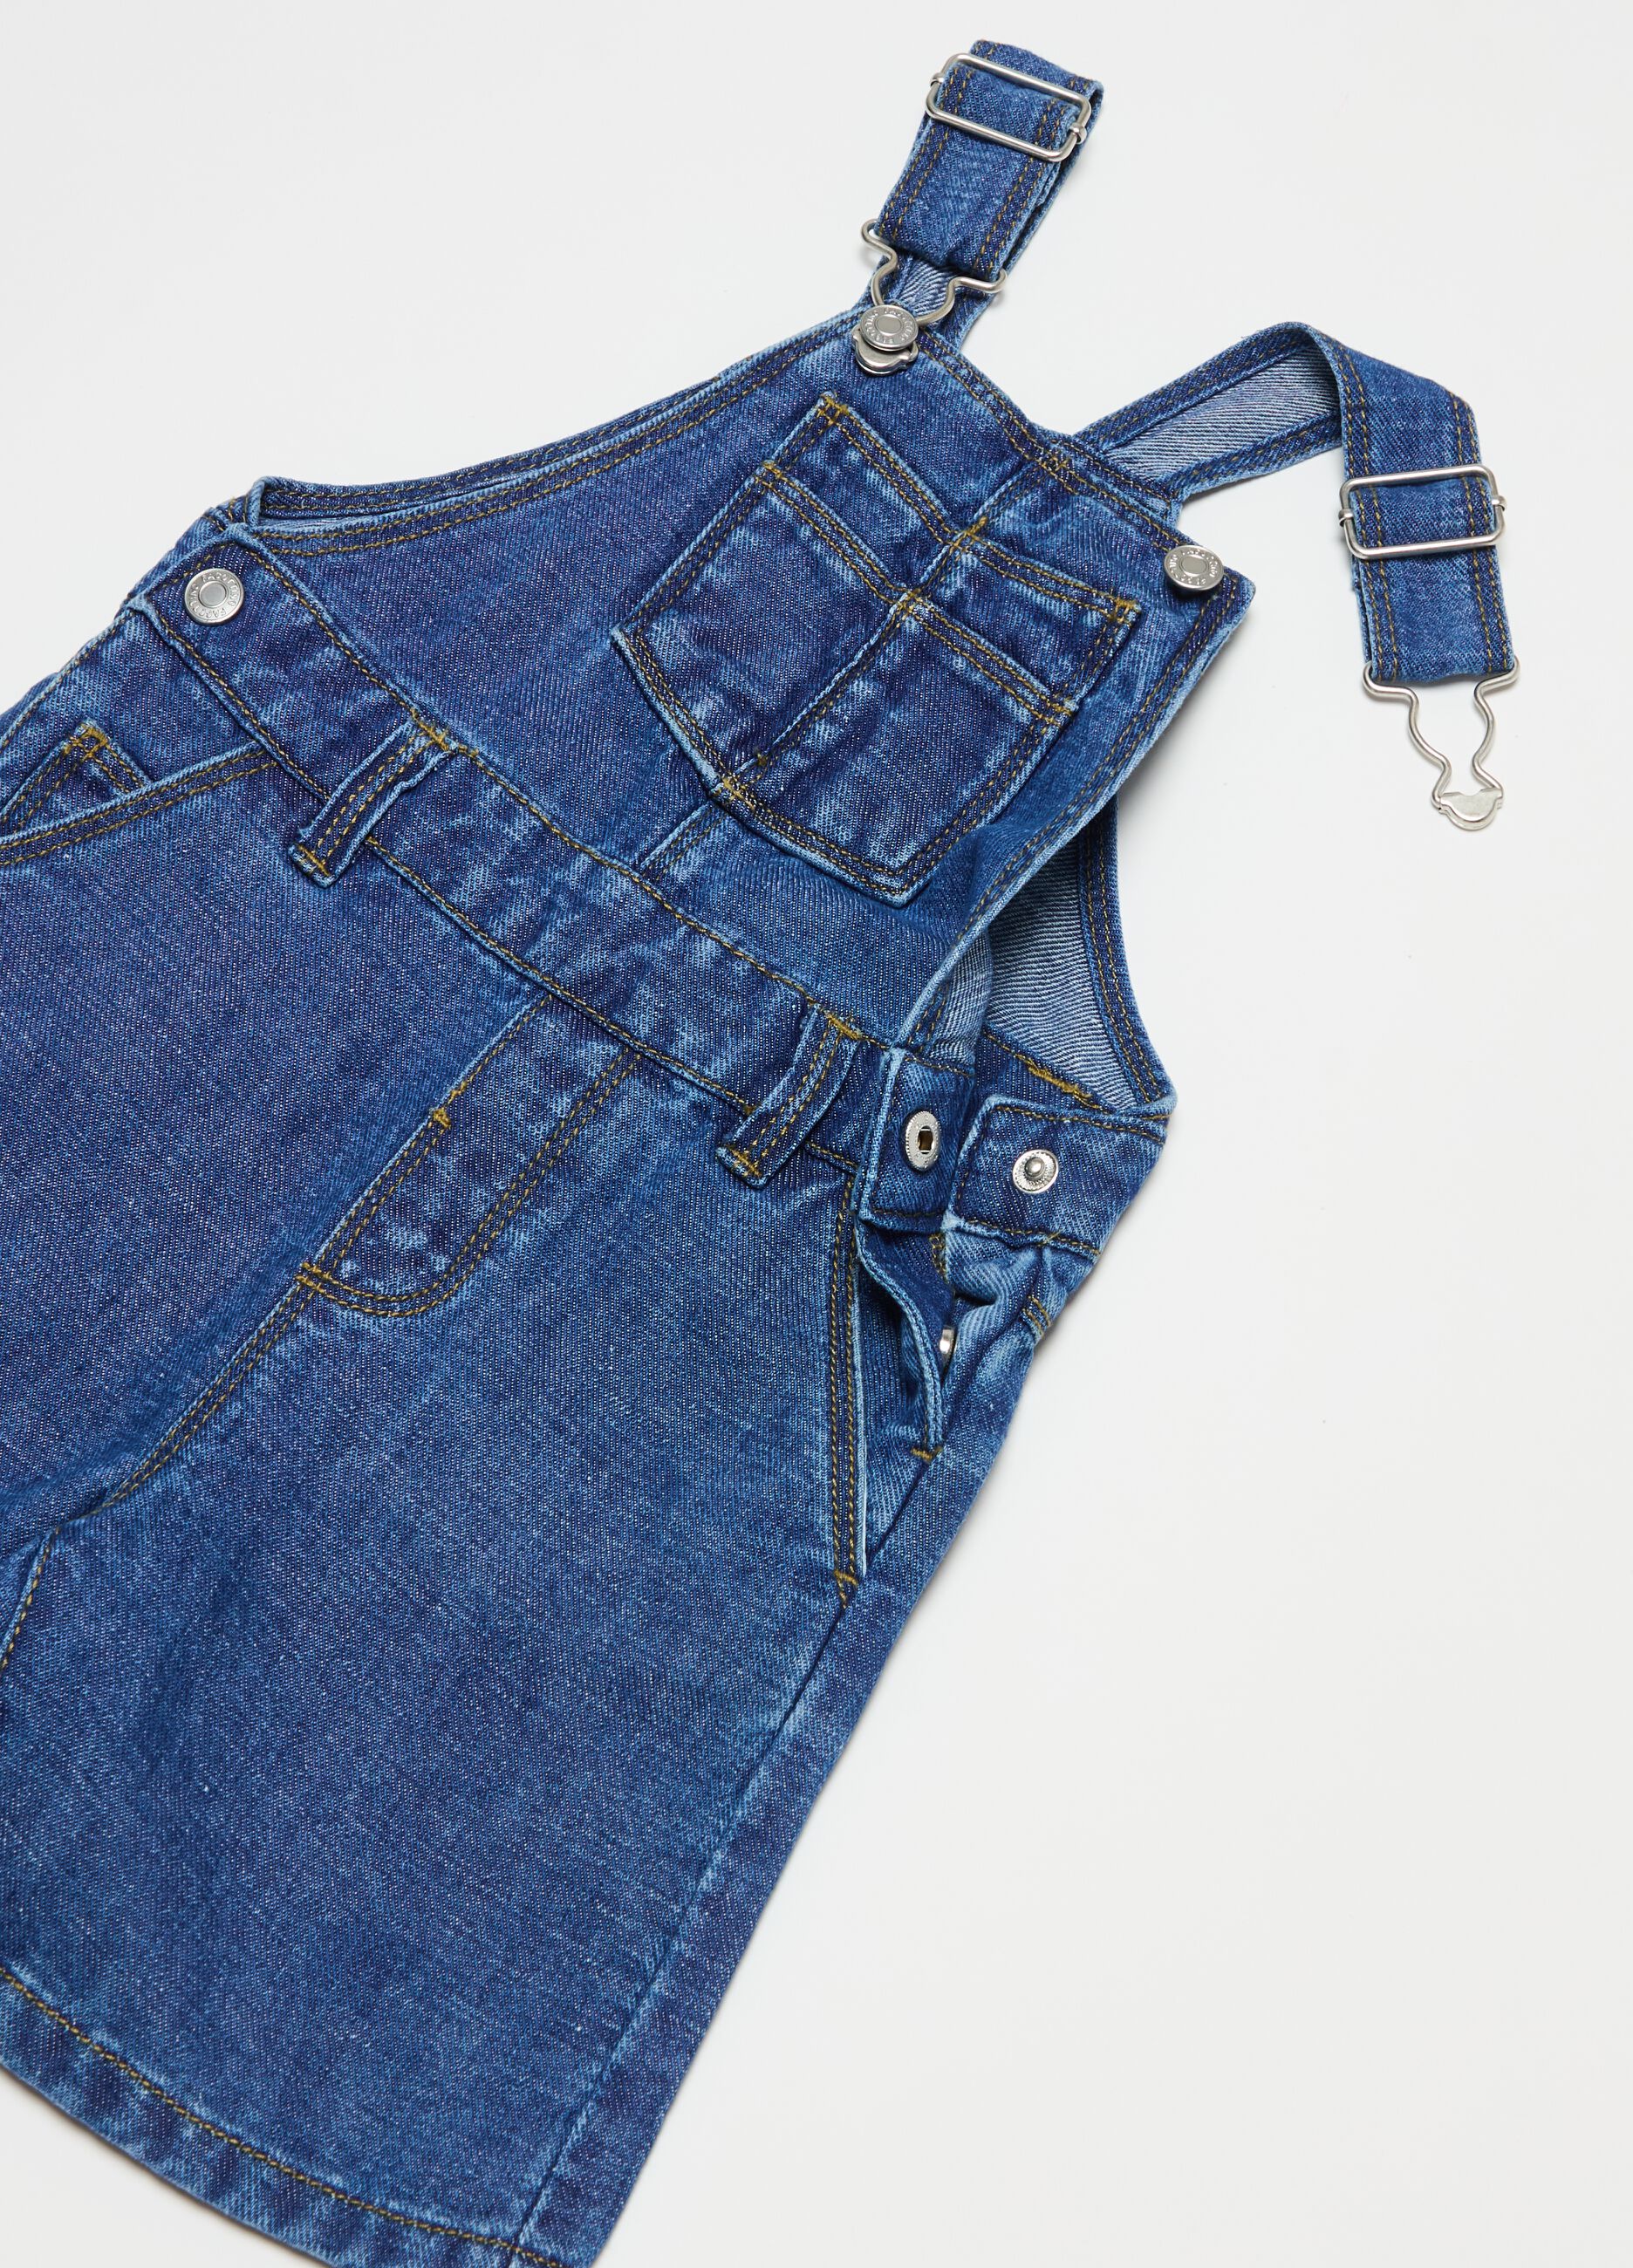 Cotton and linen denim dungarees